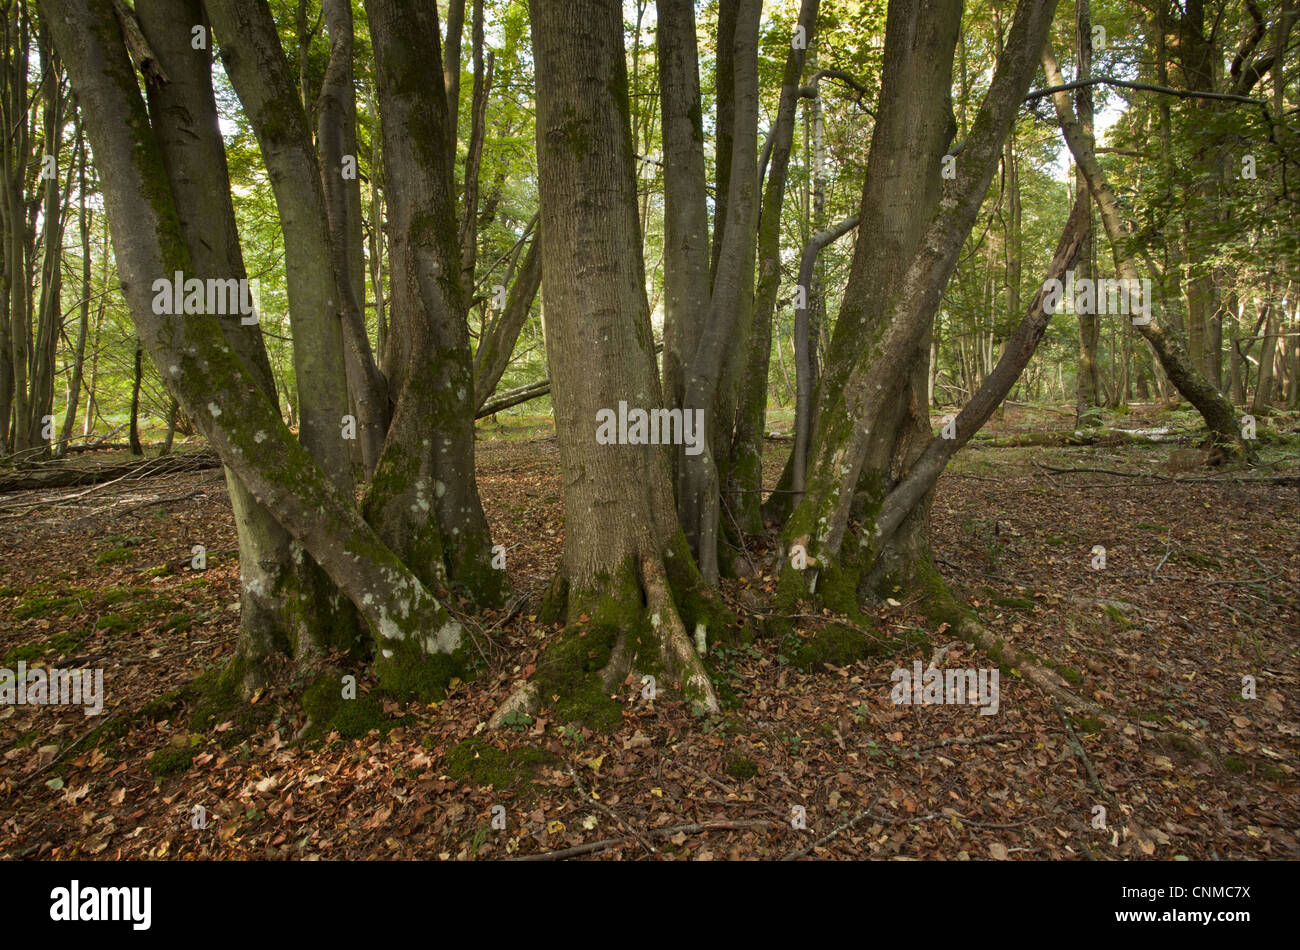 Small-leaved Lime Tilia cordata ancient coppiced trunk growing woodland habitat Langley Wood National Nature Reserve Wiltshire Stock Photo